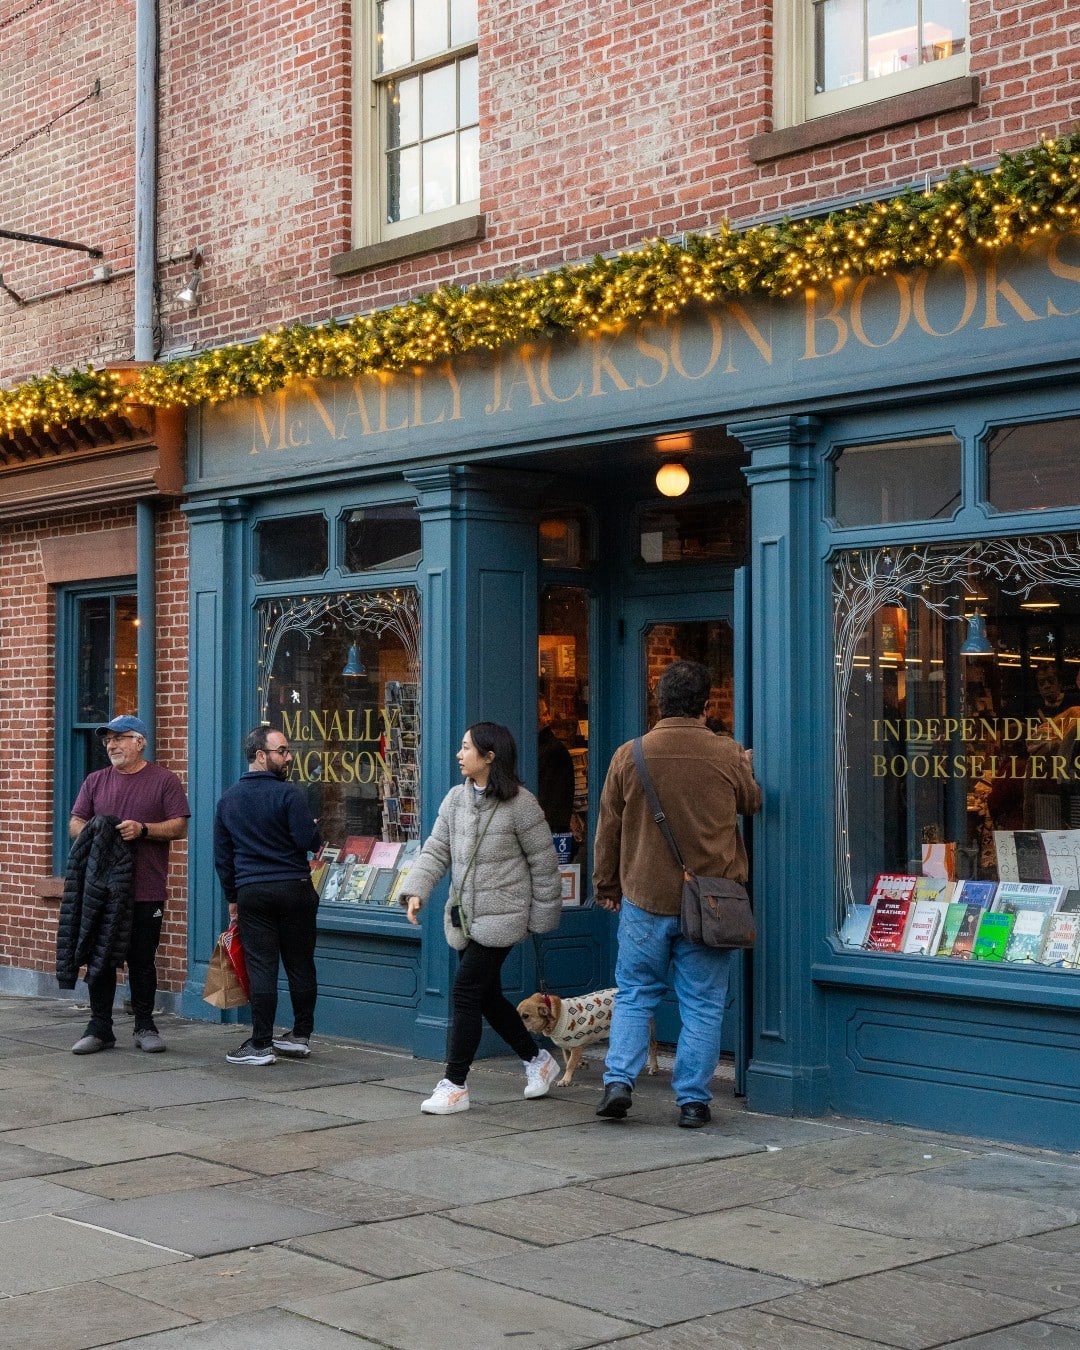 Locally owned and operated. Shelves full of page turners. Find the perfect gift for the avid reader on your list this year at @mcnallyjackson.